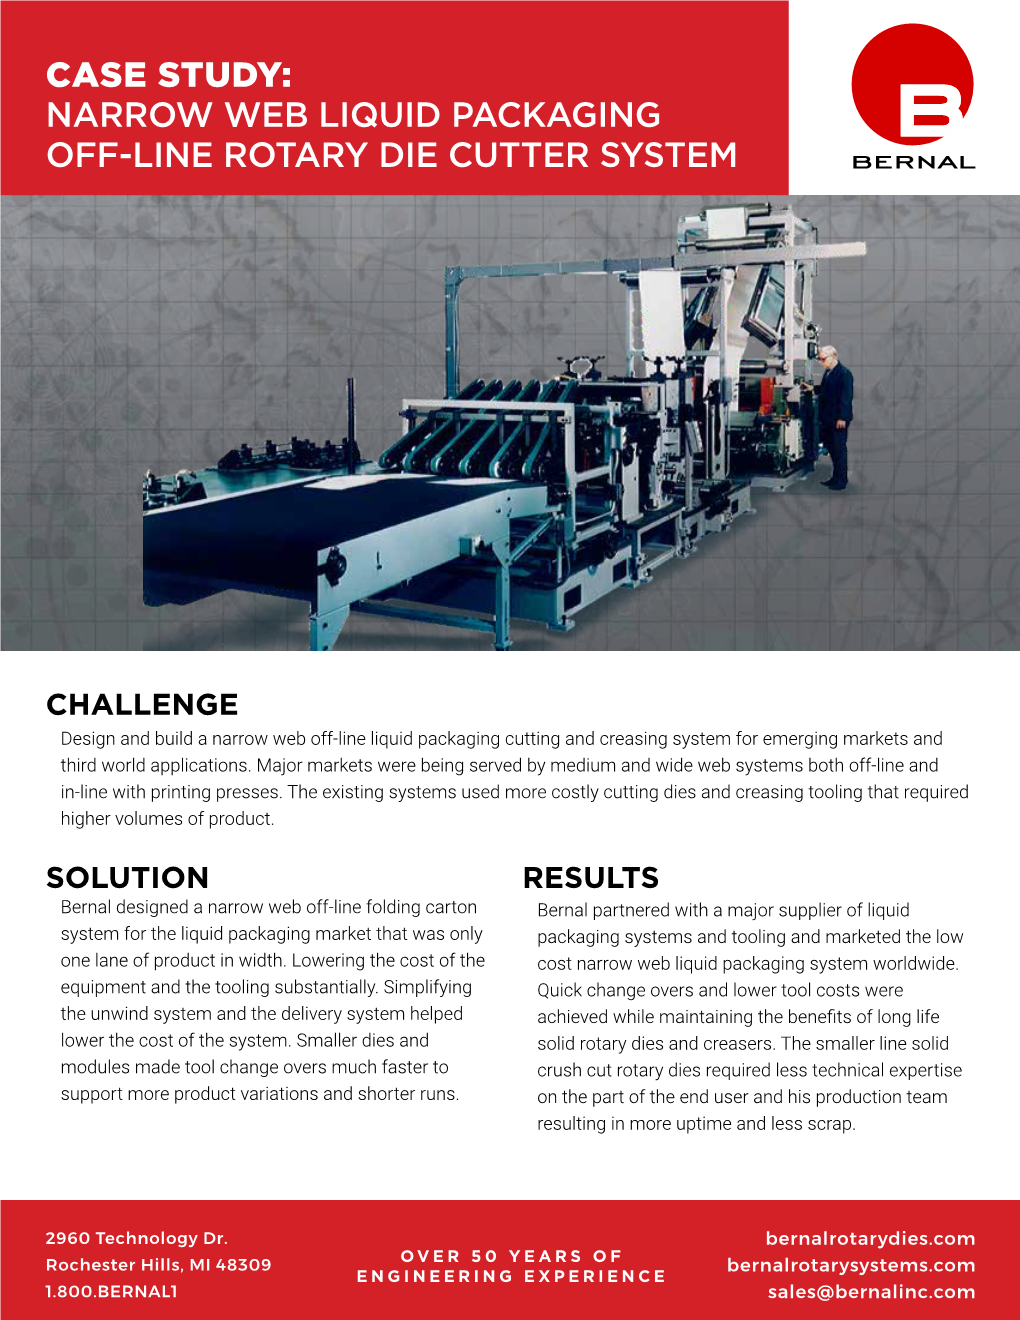 Case Study: Narrow Web Liquid Packaging Off-Line Rotary Die Cutter System